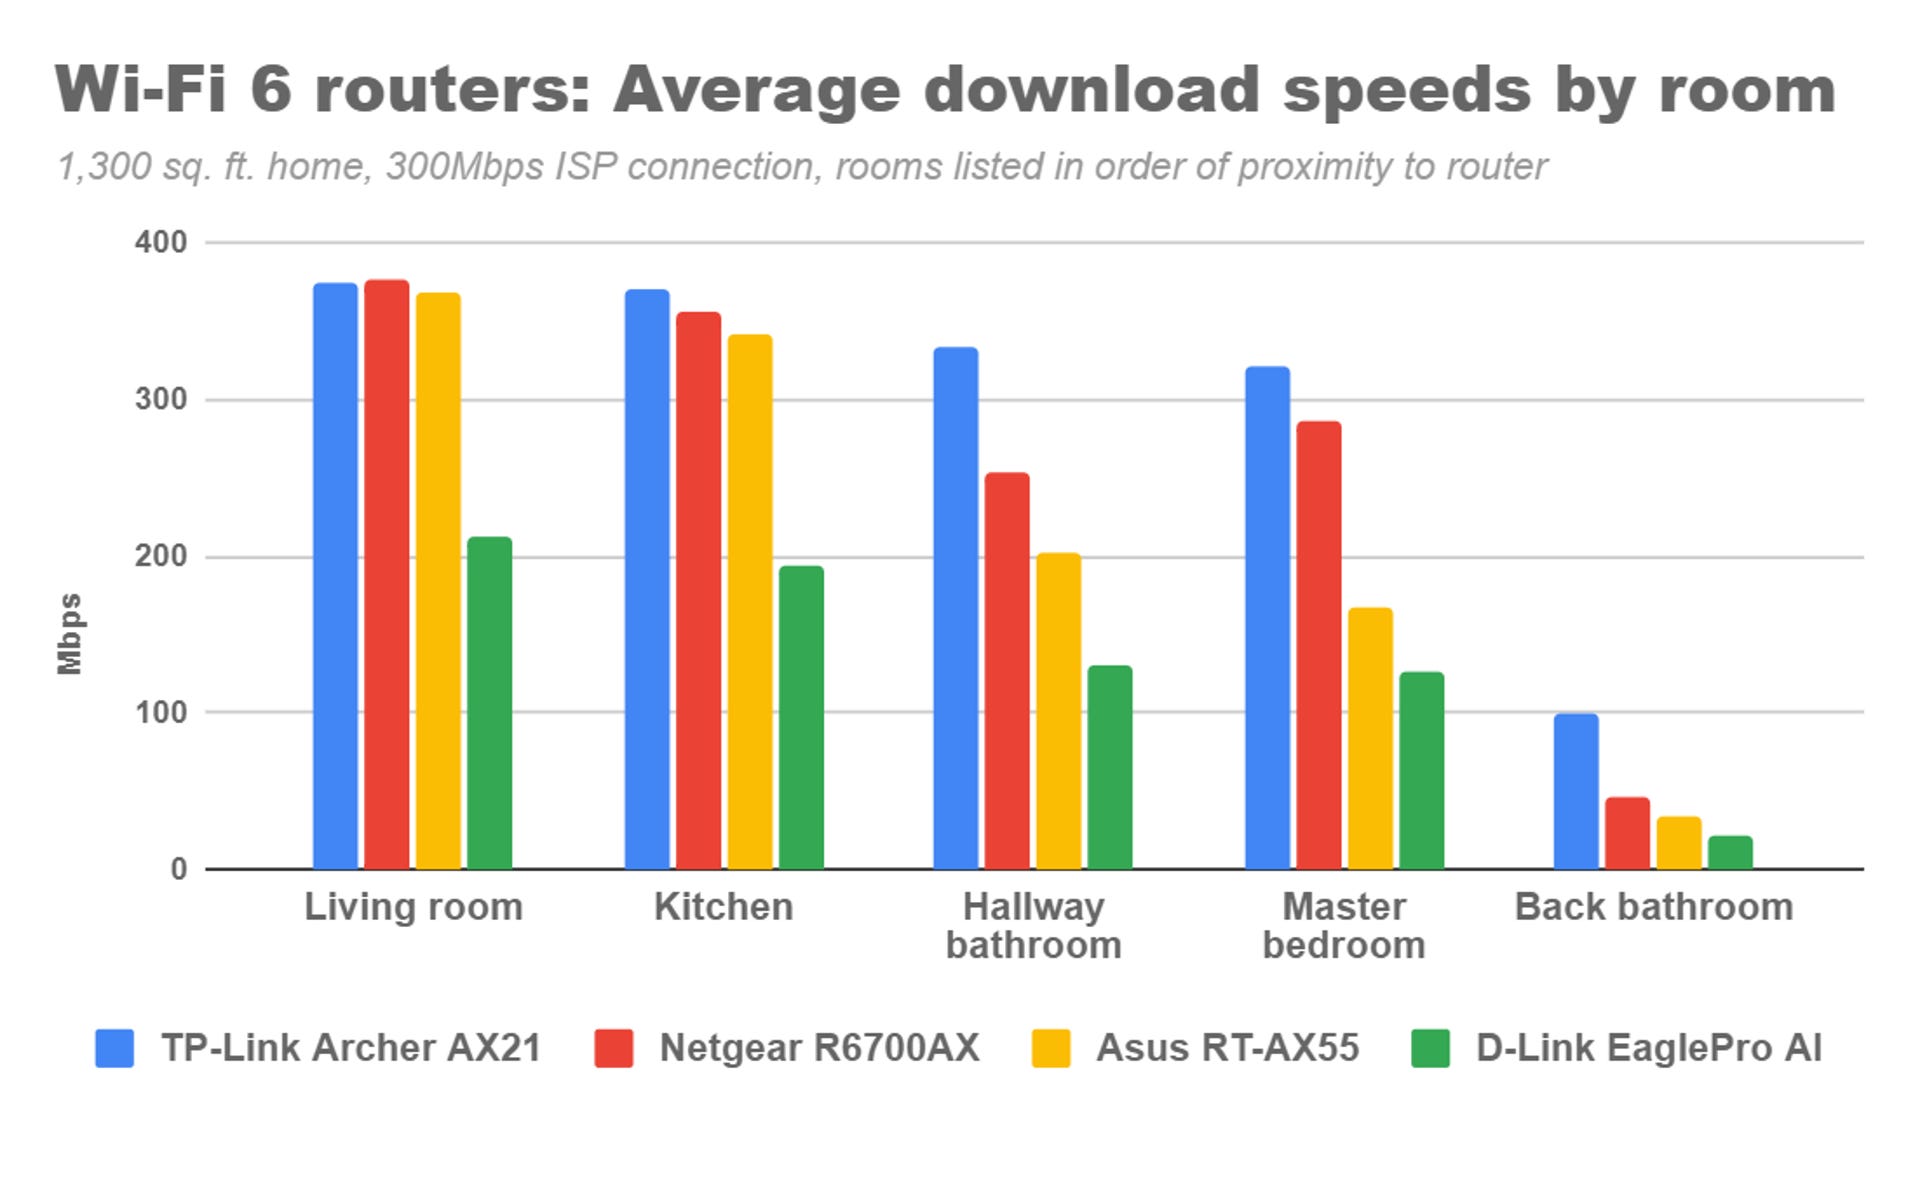 d-link-eaglepro-ai-wi-fi-6-router-versus-tp-link-archer-ax21-netgear-r6700ax-asus-rt-ax55.png